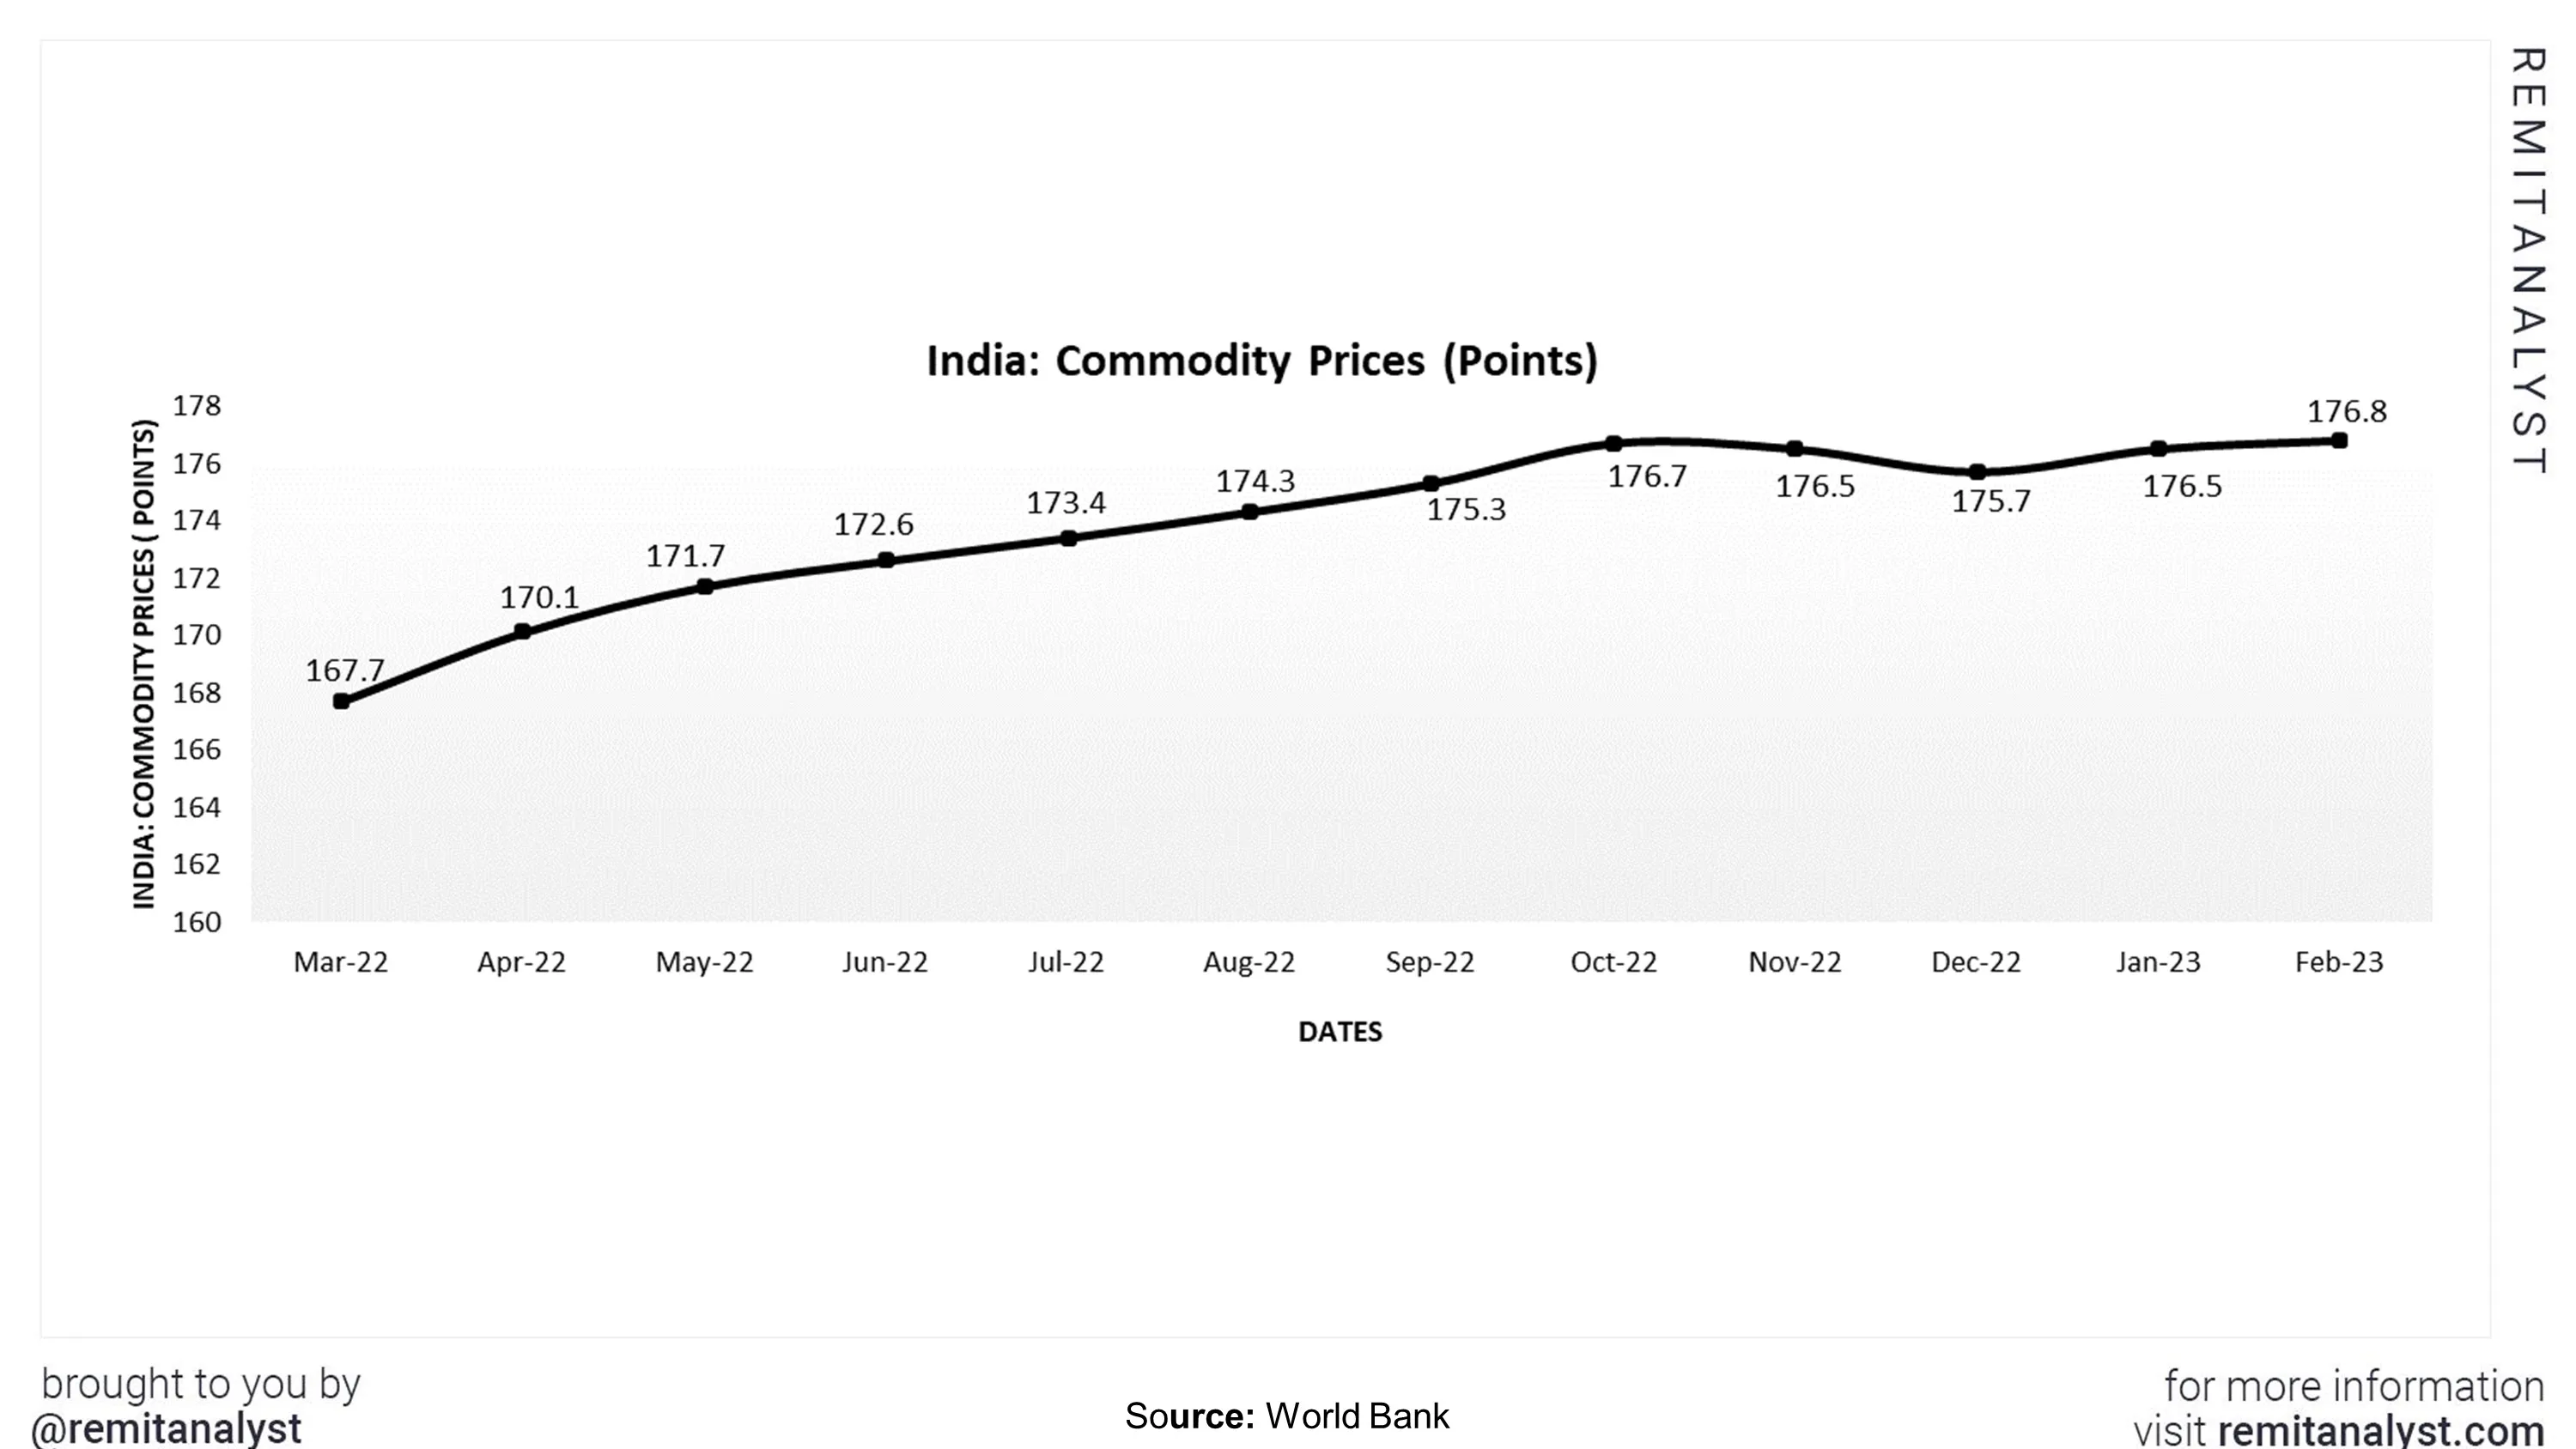 commodity-prices-india-from-mar-2022-to-feb-2023